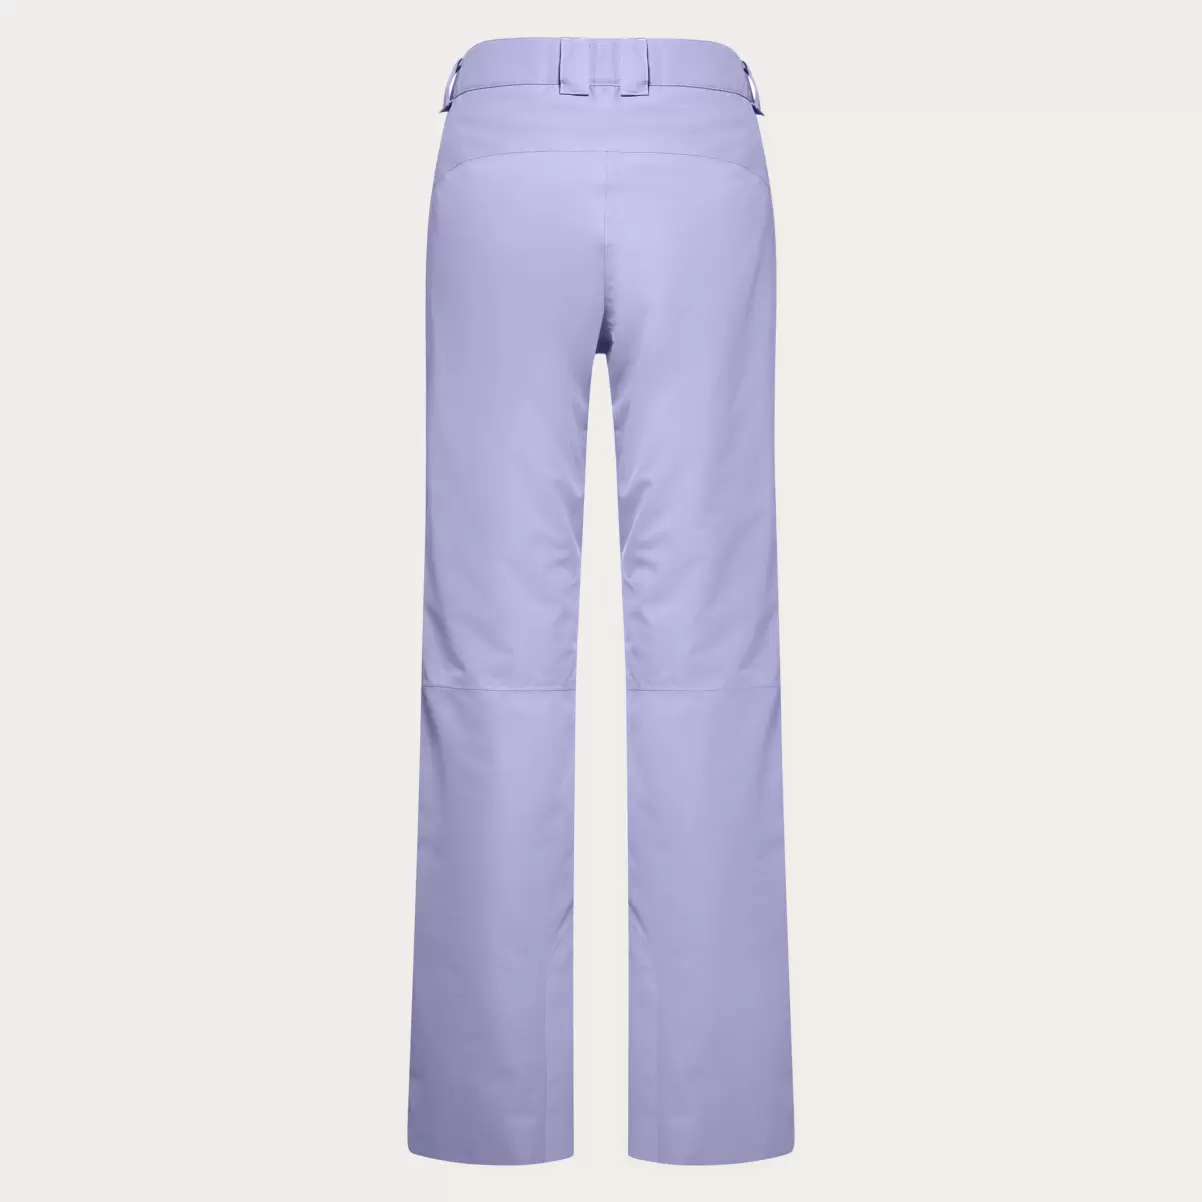 Men Oakley Jasmine Insulated Pant New Lilac Pants - 3